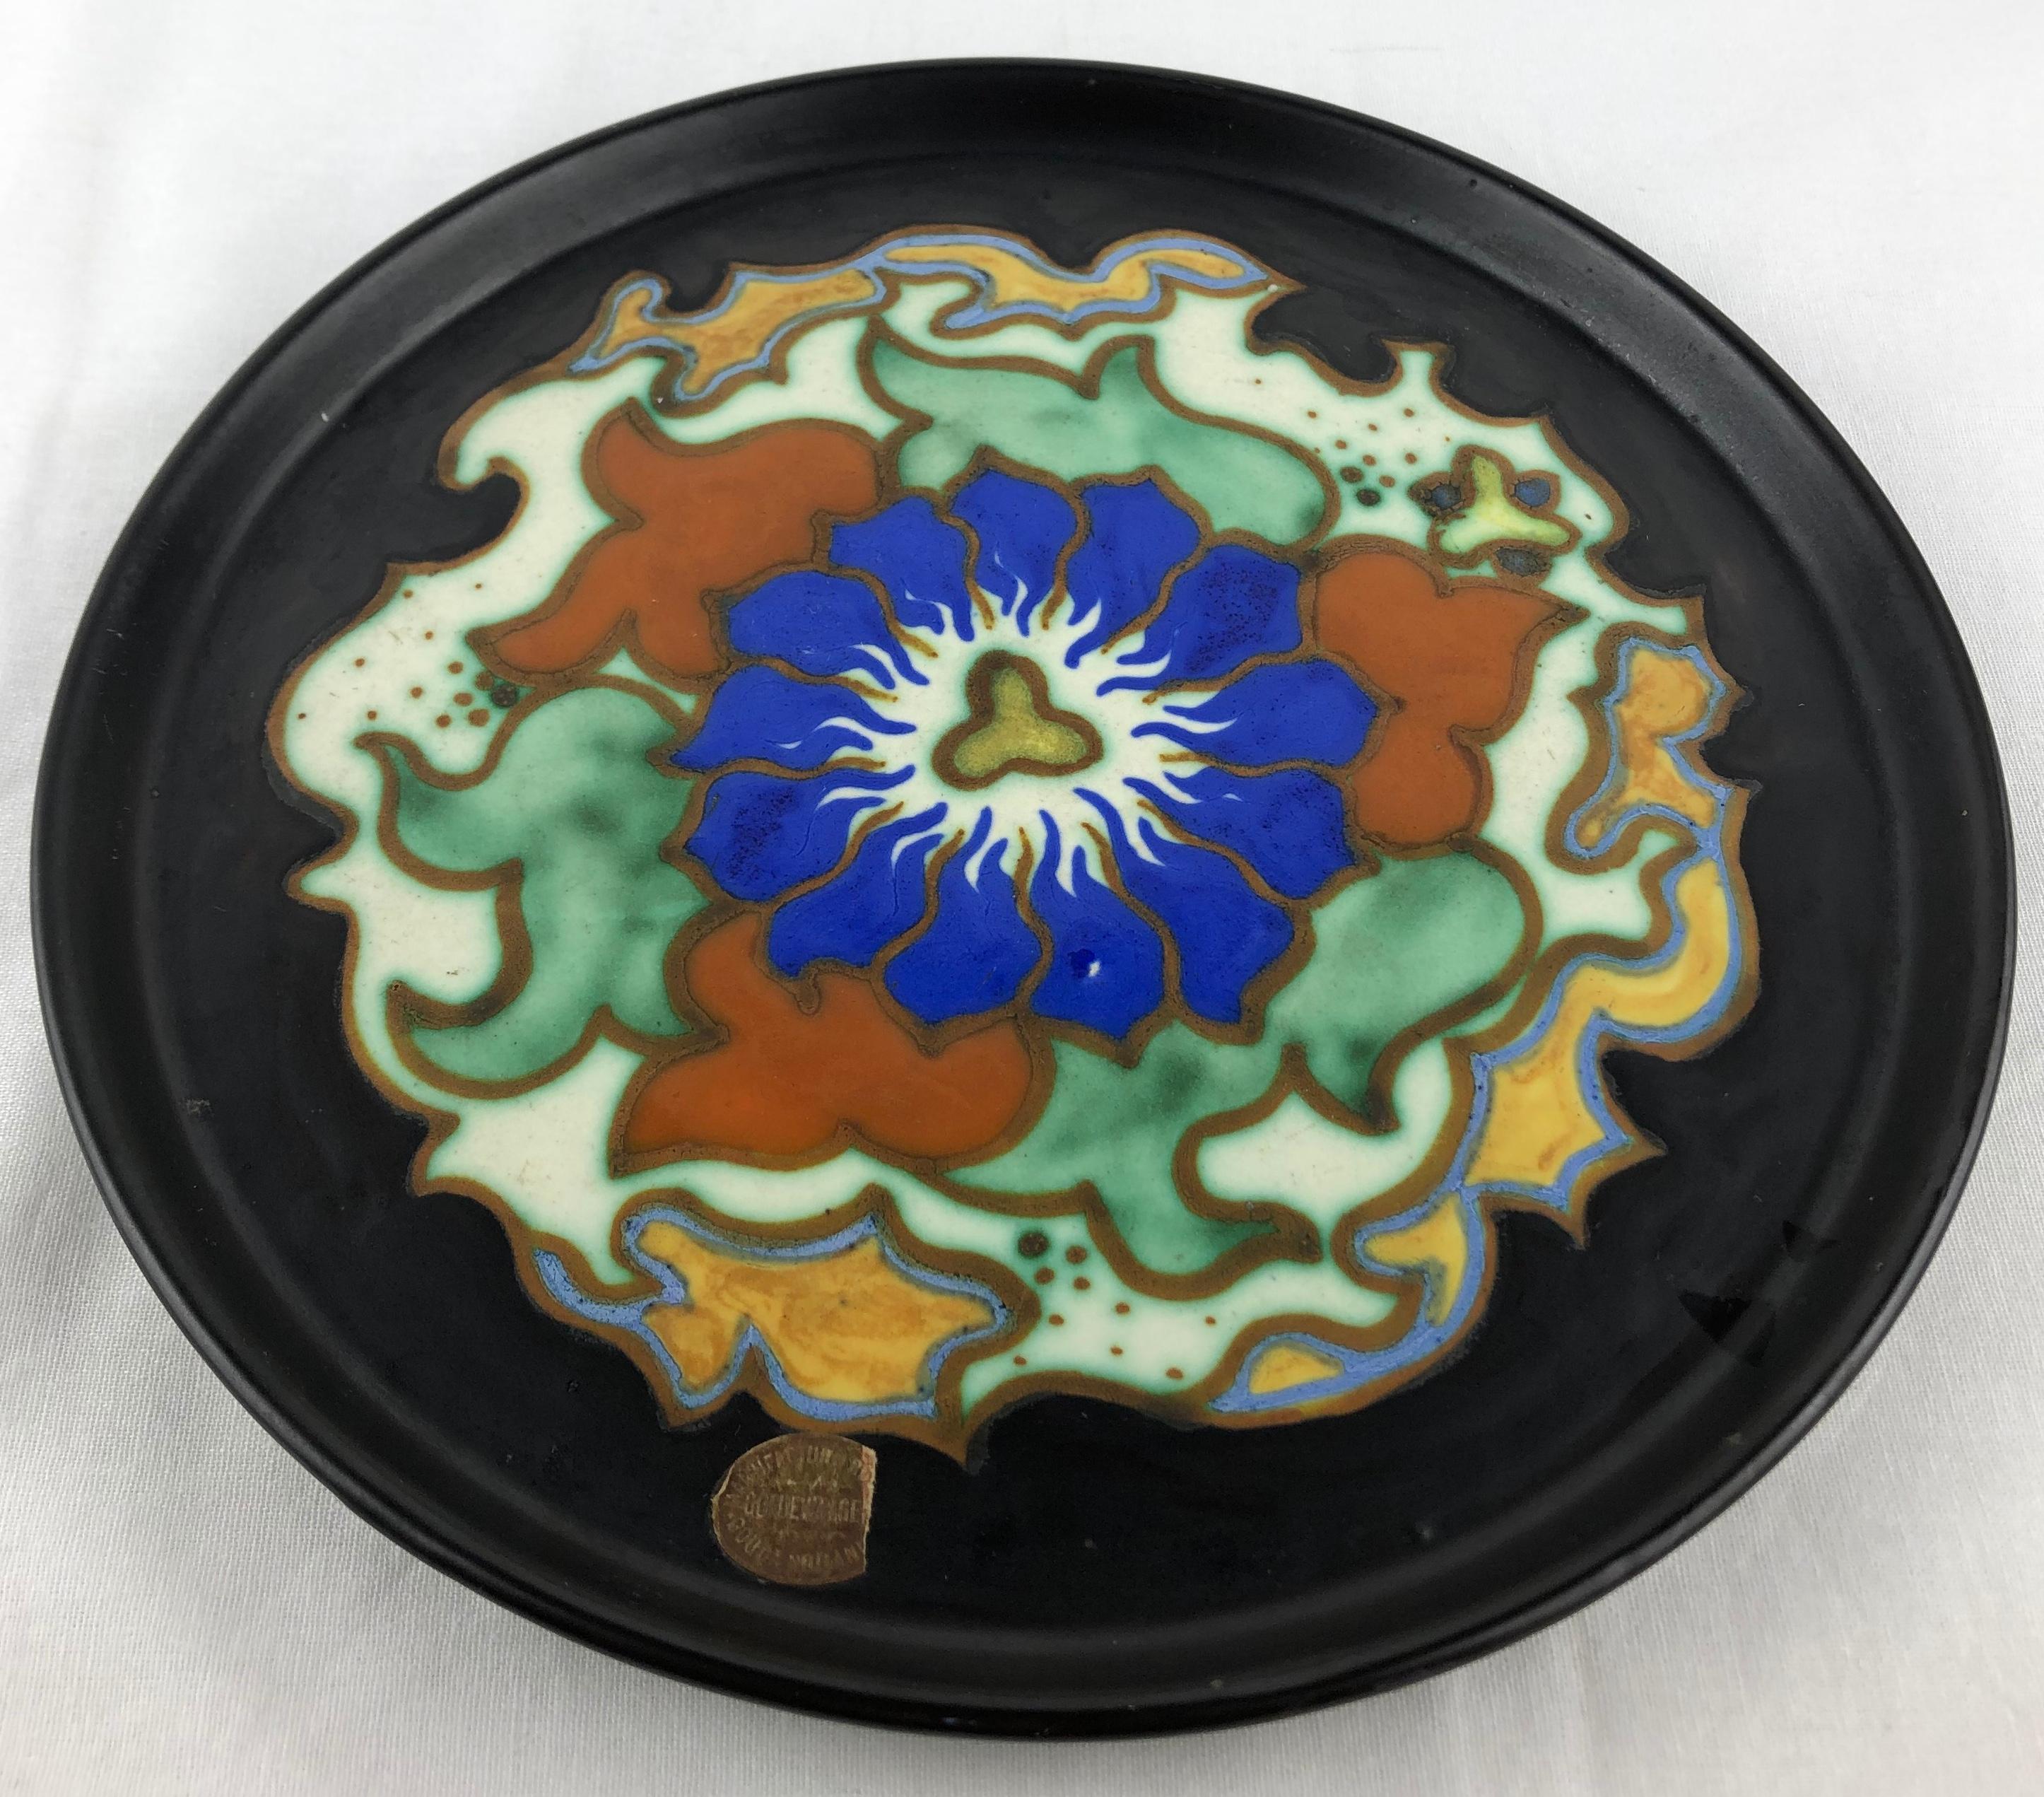 Dutch Art Nouveau ceramic dish from Gouda, Holland with traditional period flowery and curvaceous designs. Matte glaze, mixture of abstract and floral designs, circa 1920s.

Very colorful and pleasing to the eye.
Beautiful handcrafted, hand